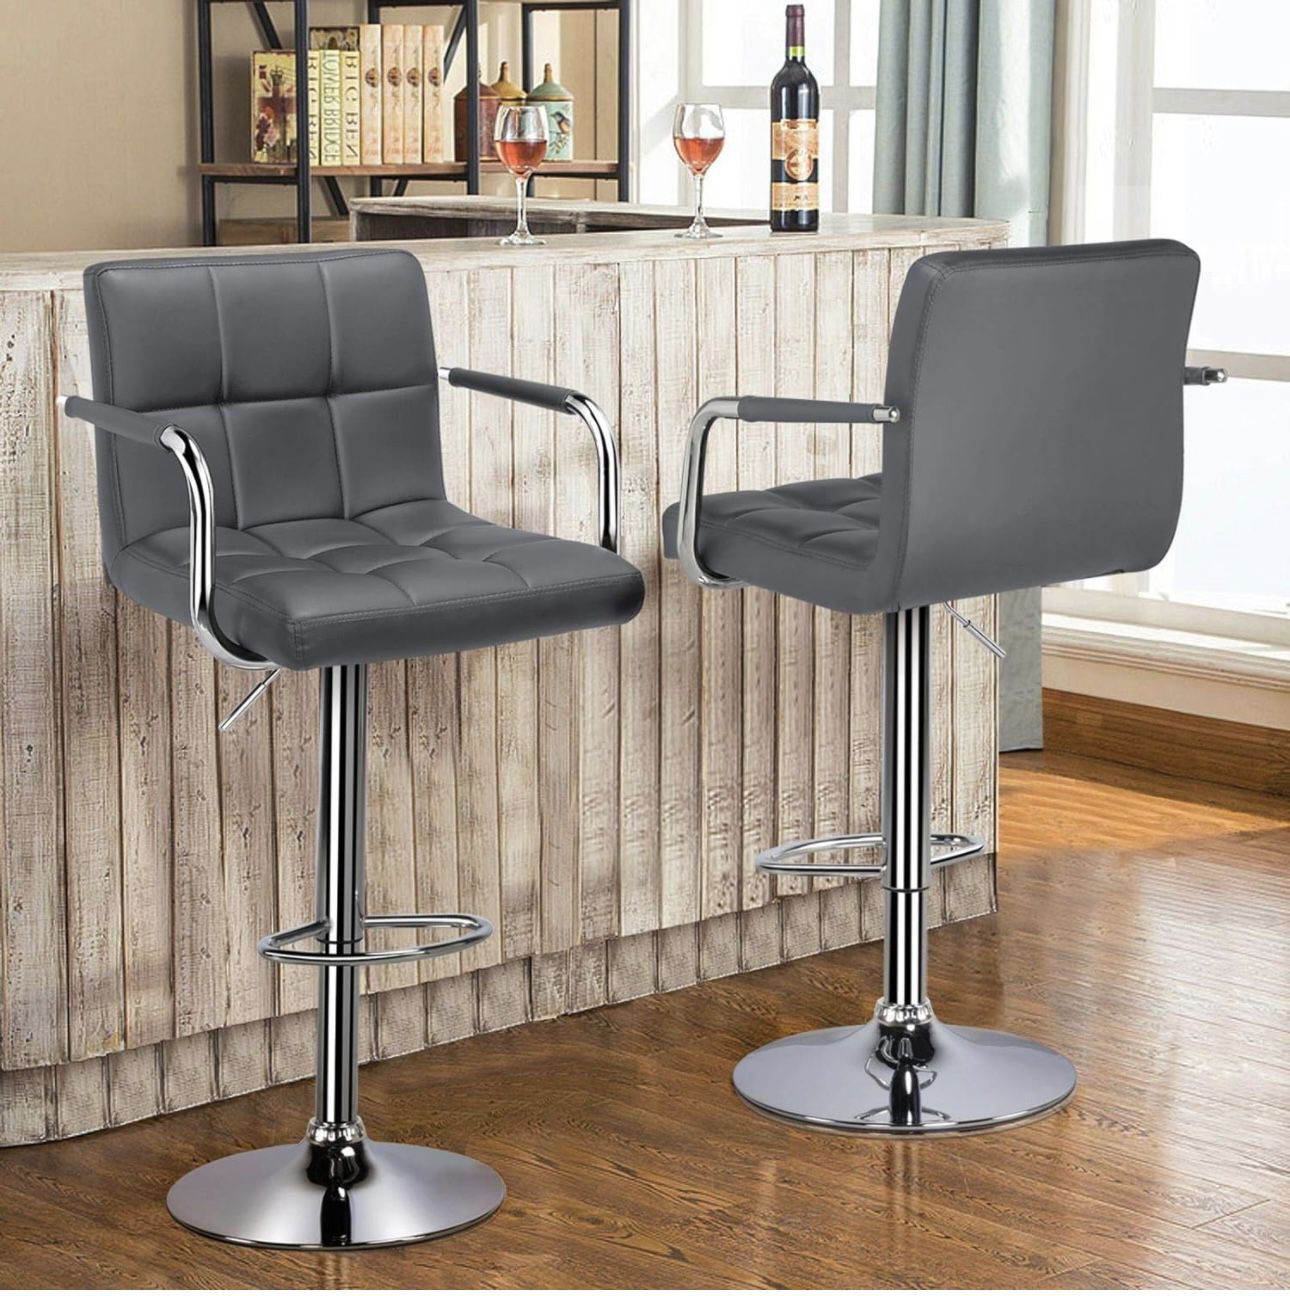 Counter Height Bar Stools Set of 2 PU Leather Swivel BarStools for Kitchen Stool Height Adjustable Counter Stool Barstools Dining Chair with Armrest, 